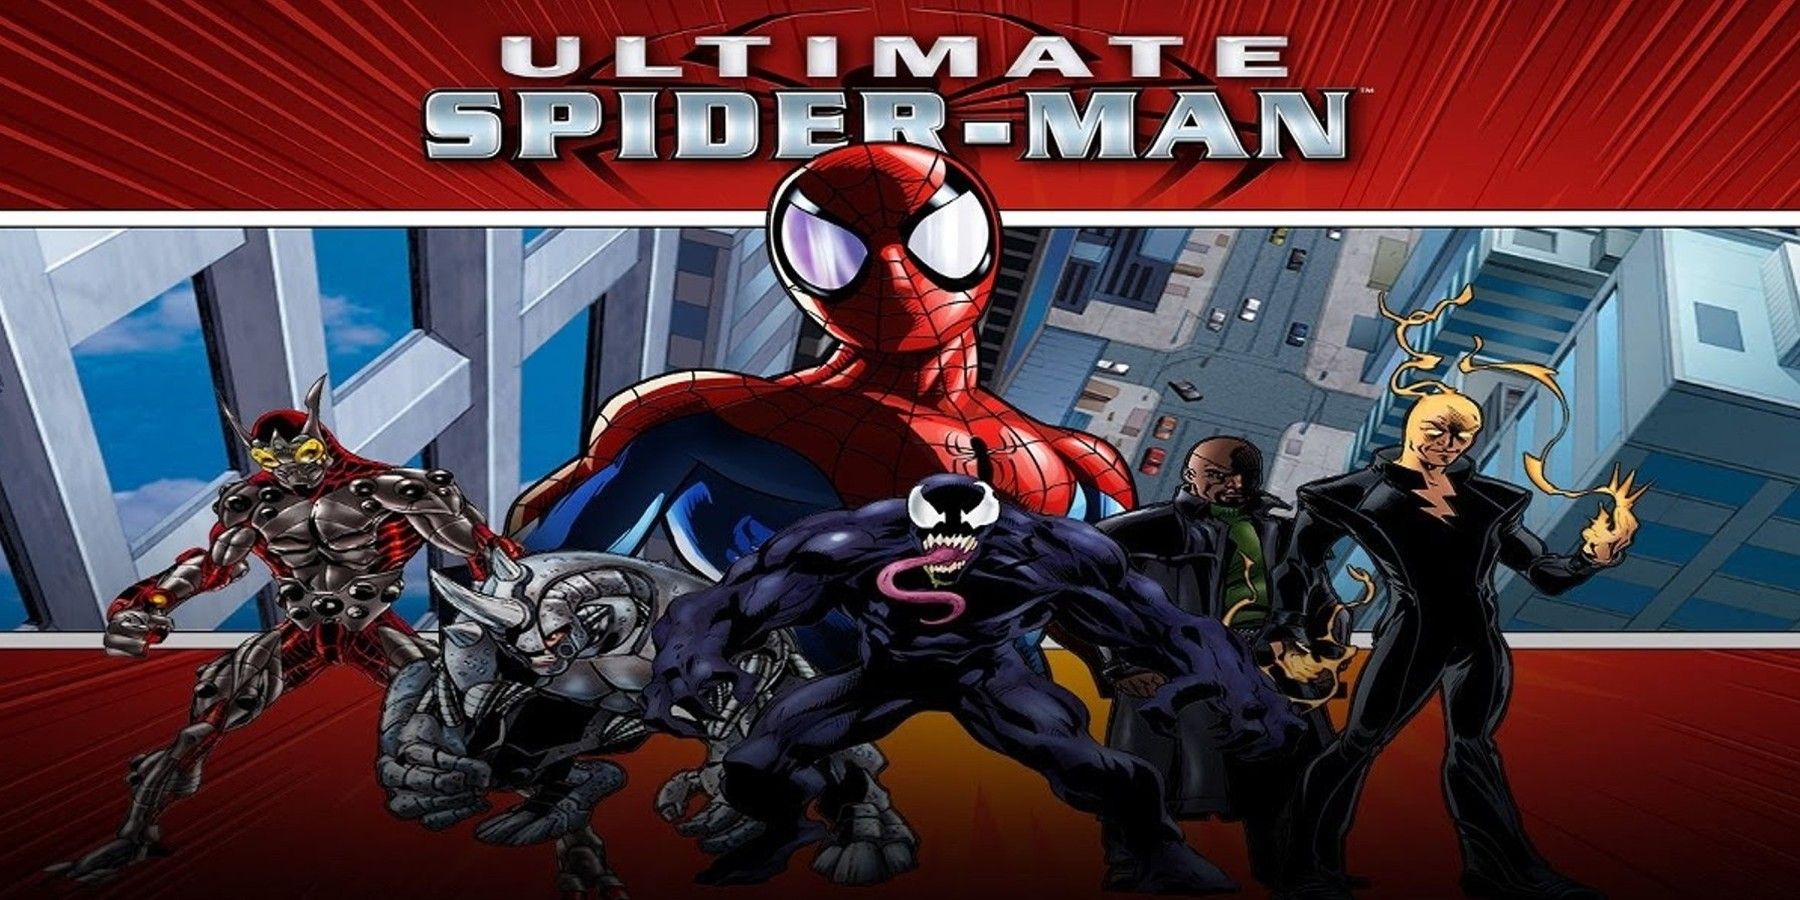 Promotional Poster for the upcoming Spiderman 2 PS5 Game : r/Marvel